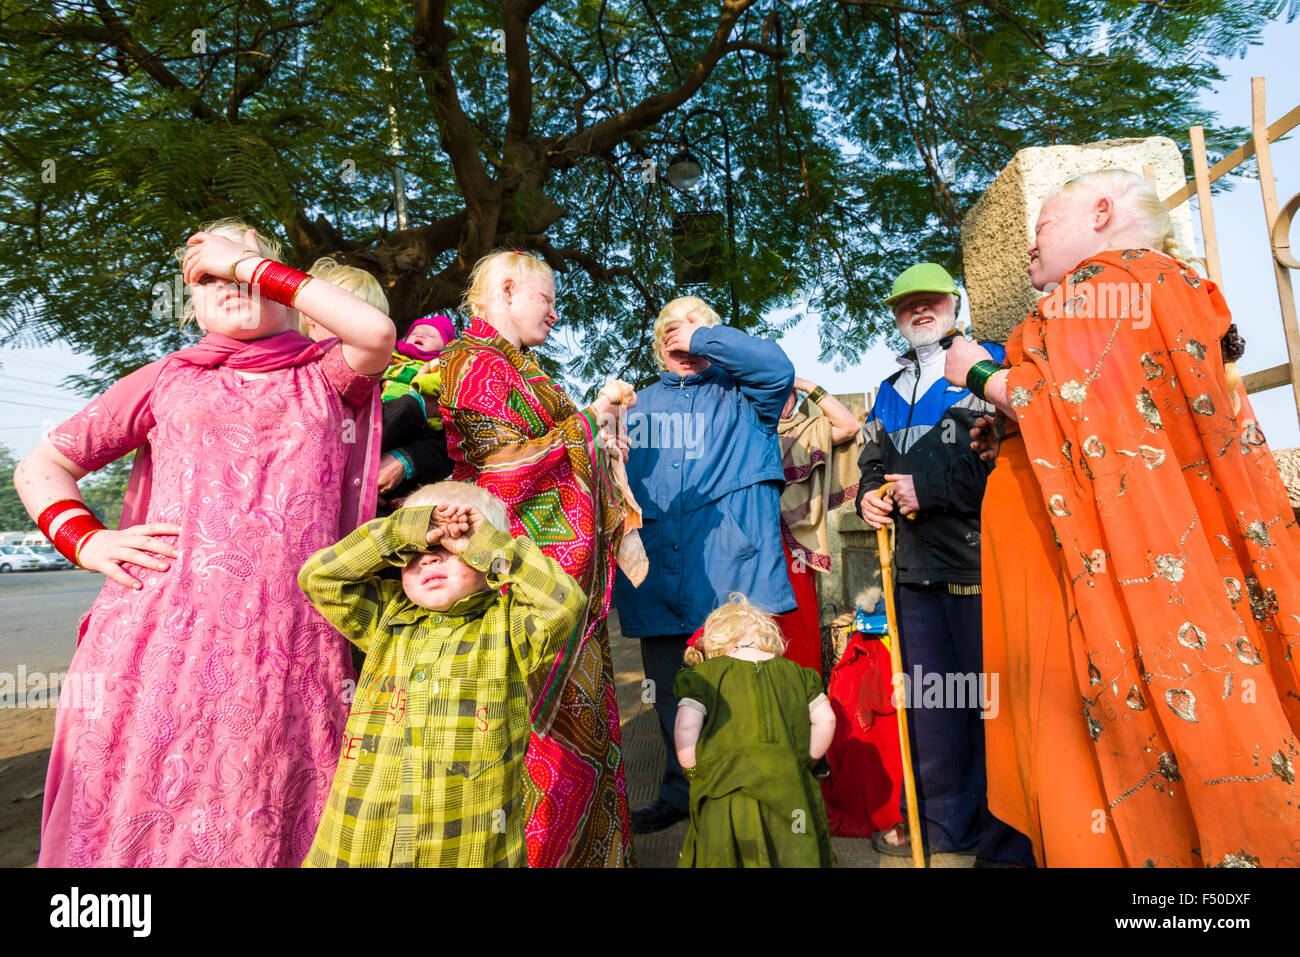 A family of Albinos, all have extremely pale skin and near-white hair, is standing on the street and covering their eyes from th Stock Photo